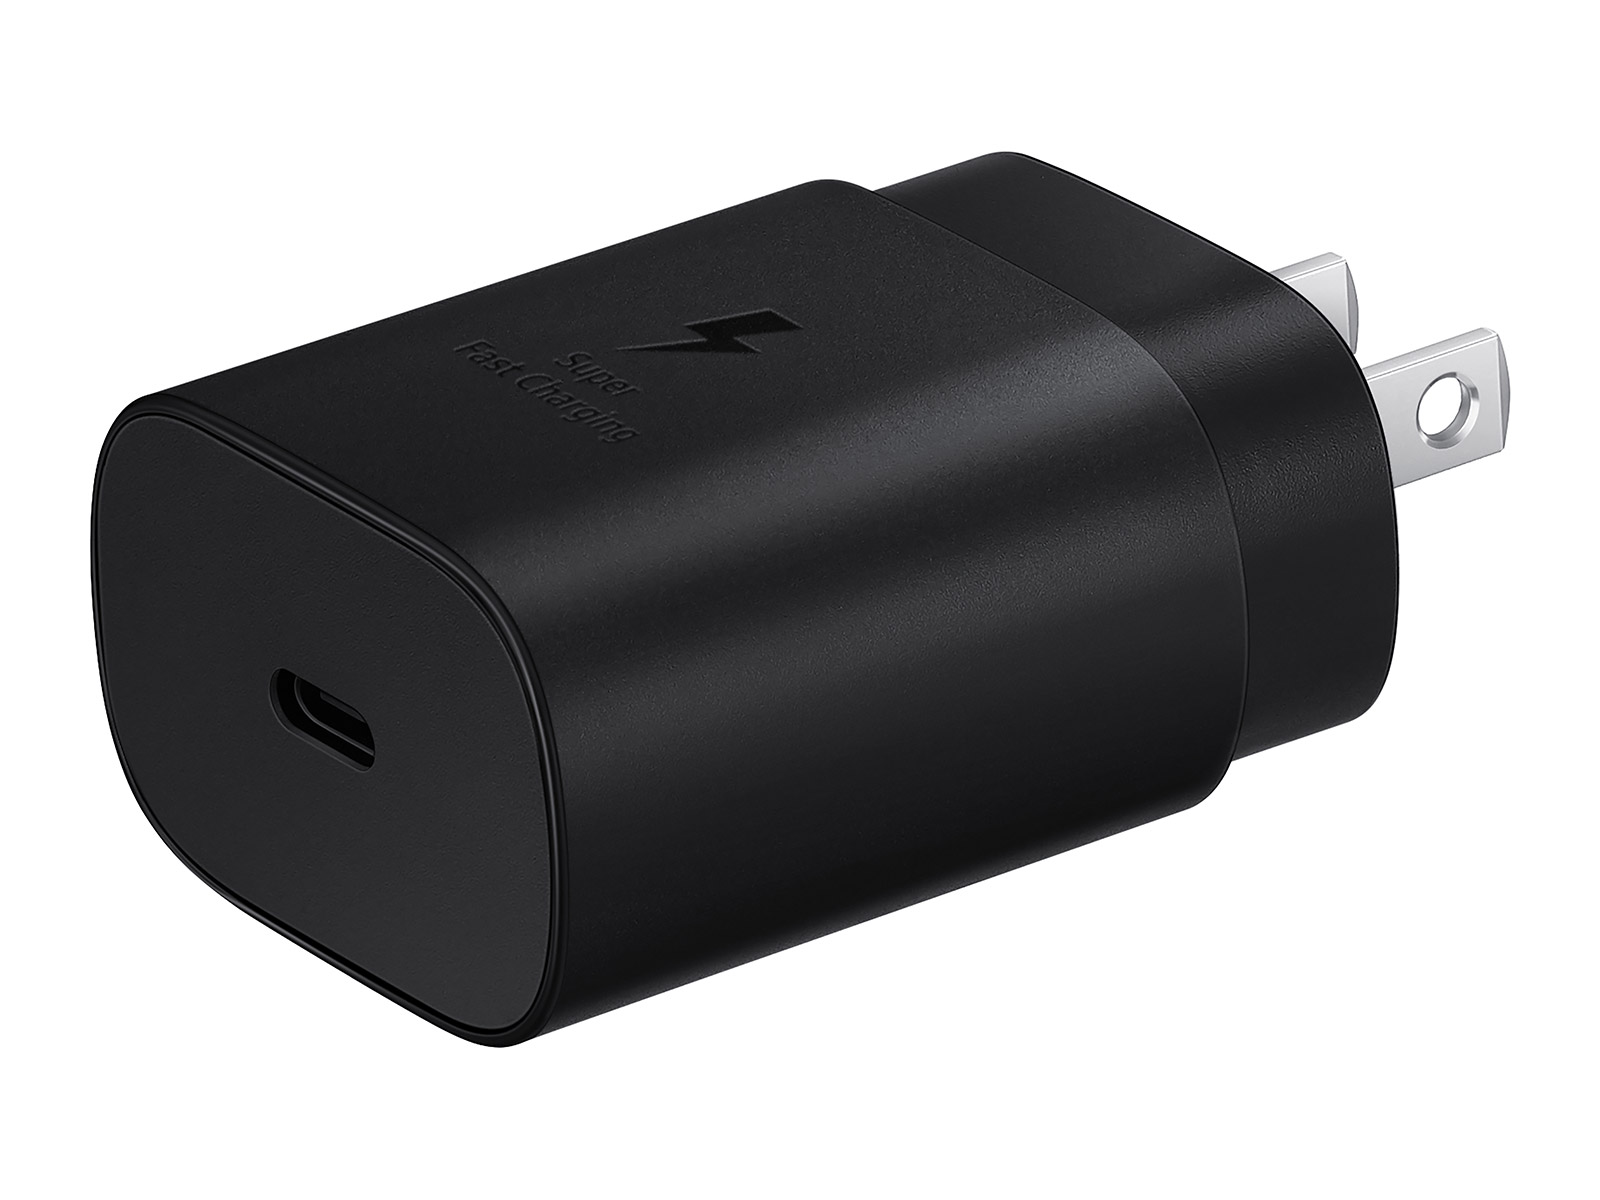 Travel Adapter, Mobile Accessories EP-TA800NBEGUS | Samsung US